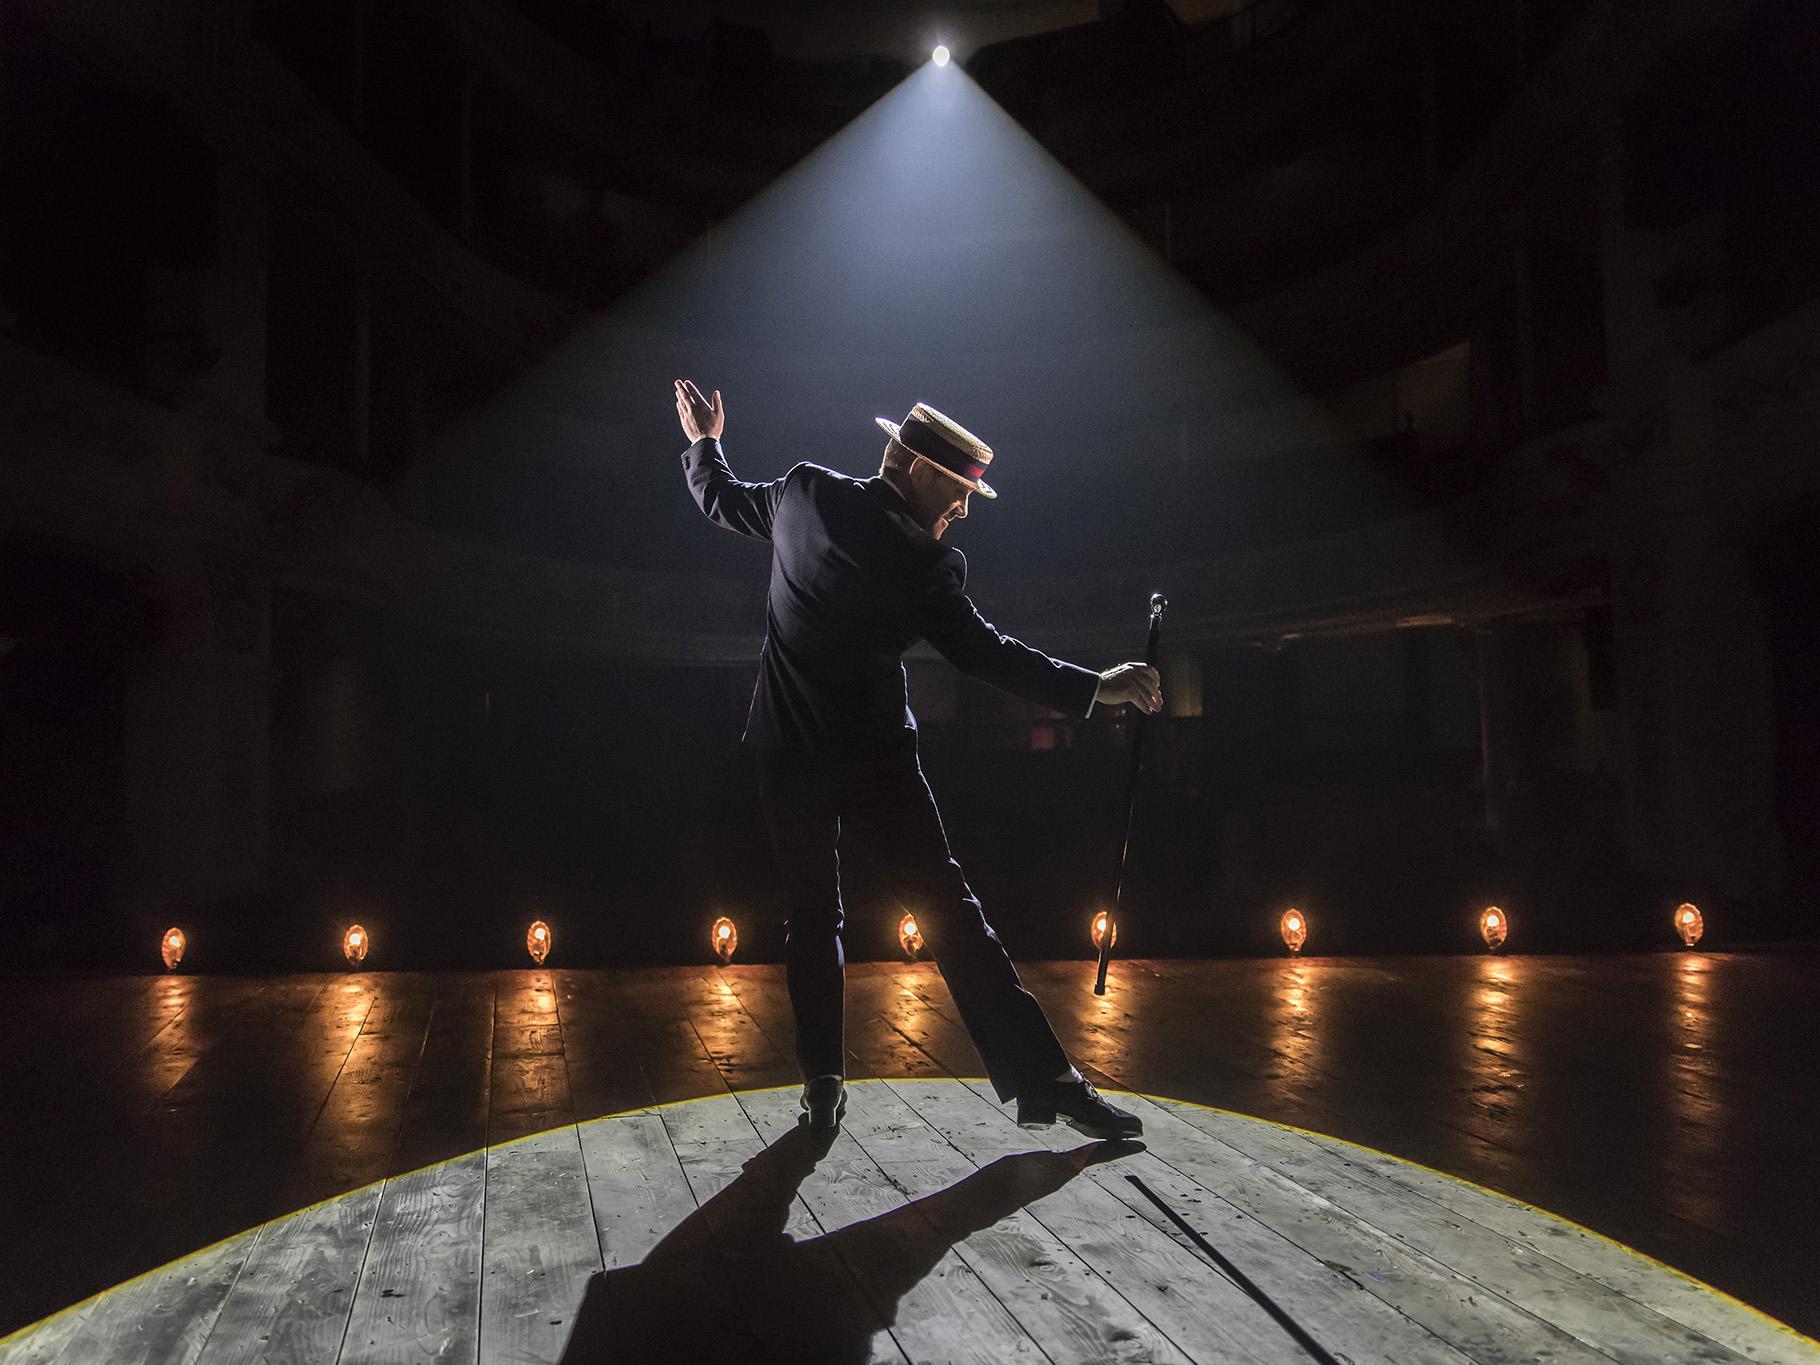 In the new production of John Osborne’s ‘The Entertainer’, Kenneth Branagh plays Archie Rice, whose son is killed during the infamous British military intervention in Egypt